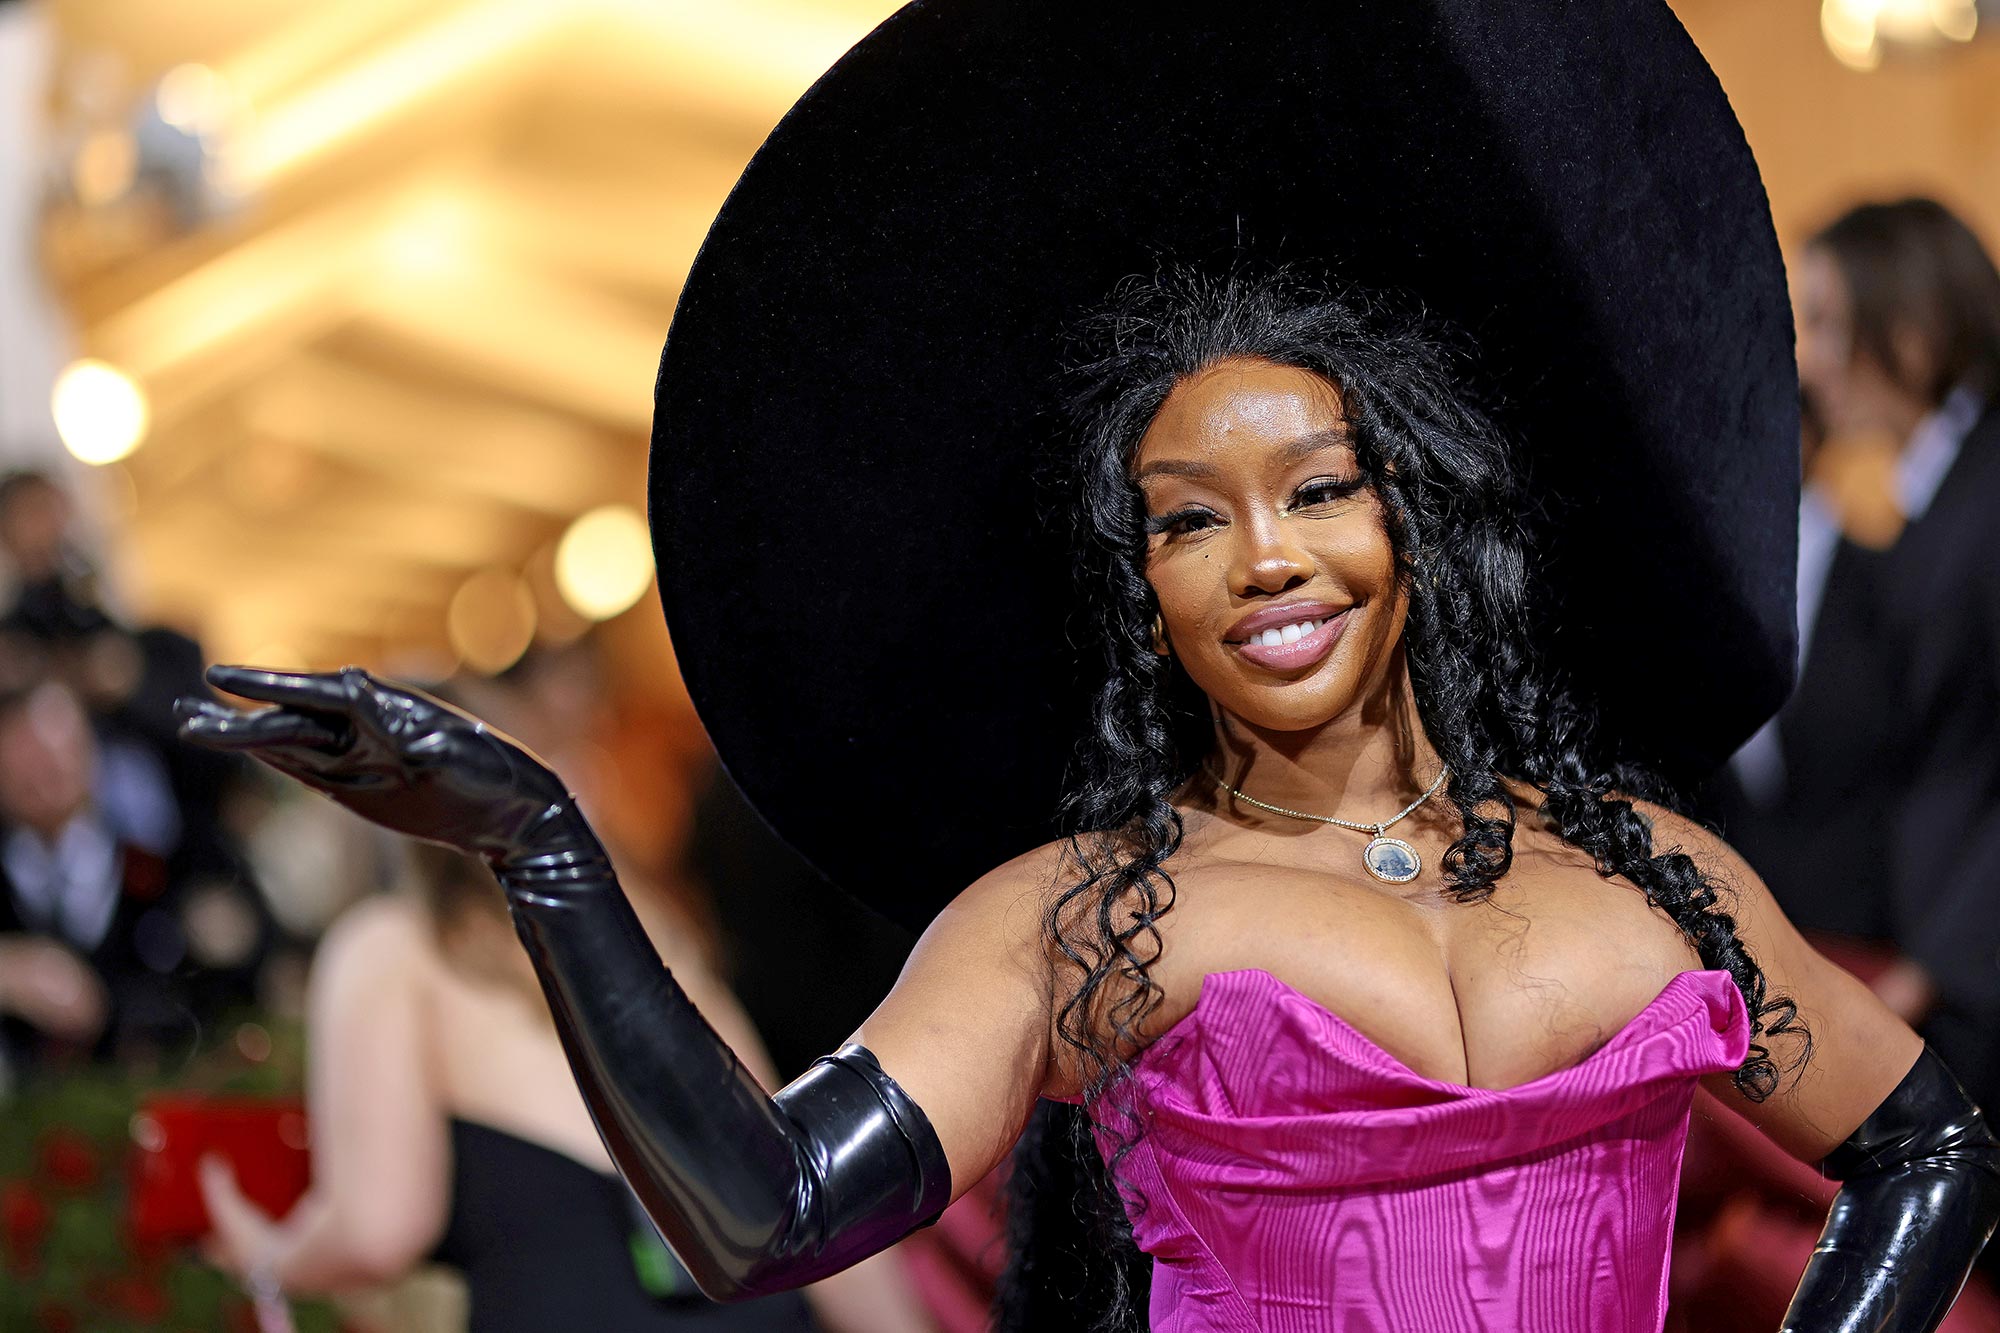 SZA Explains Why She Decided to Have Her Breast Implants Removed: 'It Was Painful'